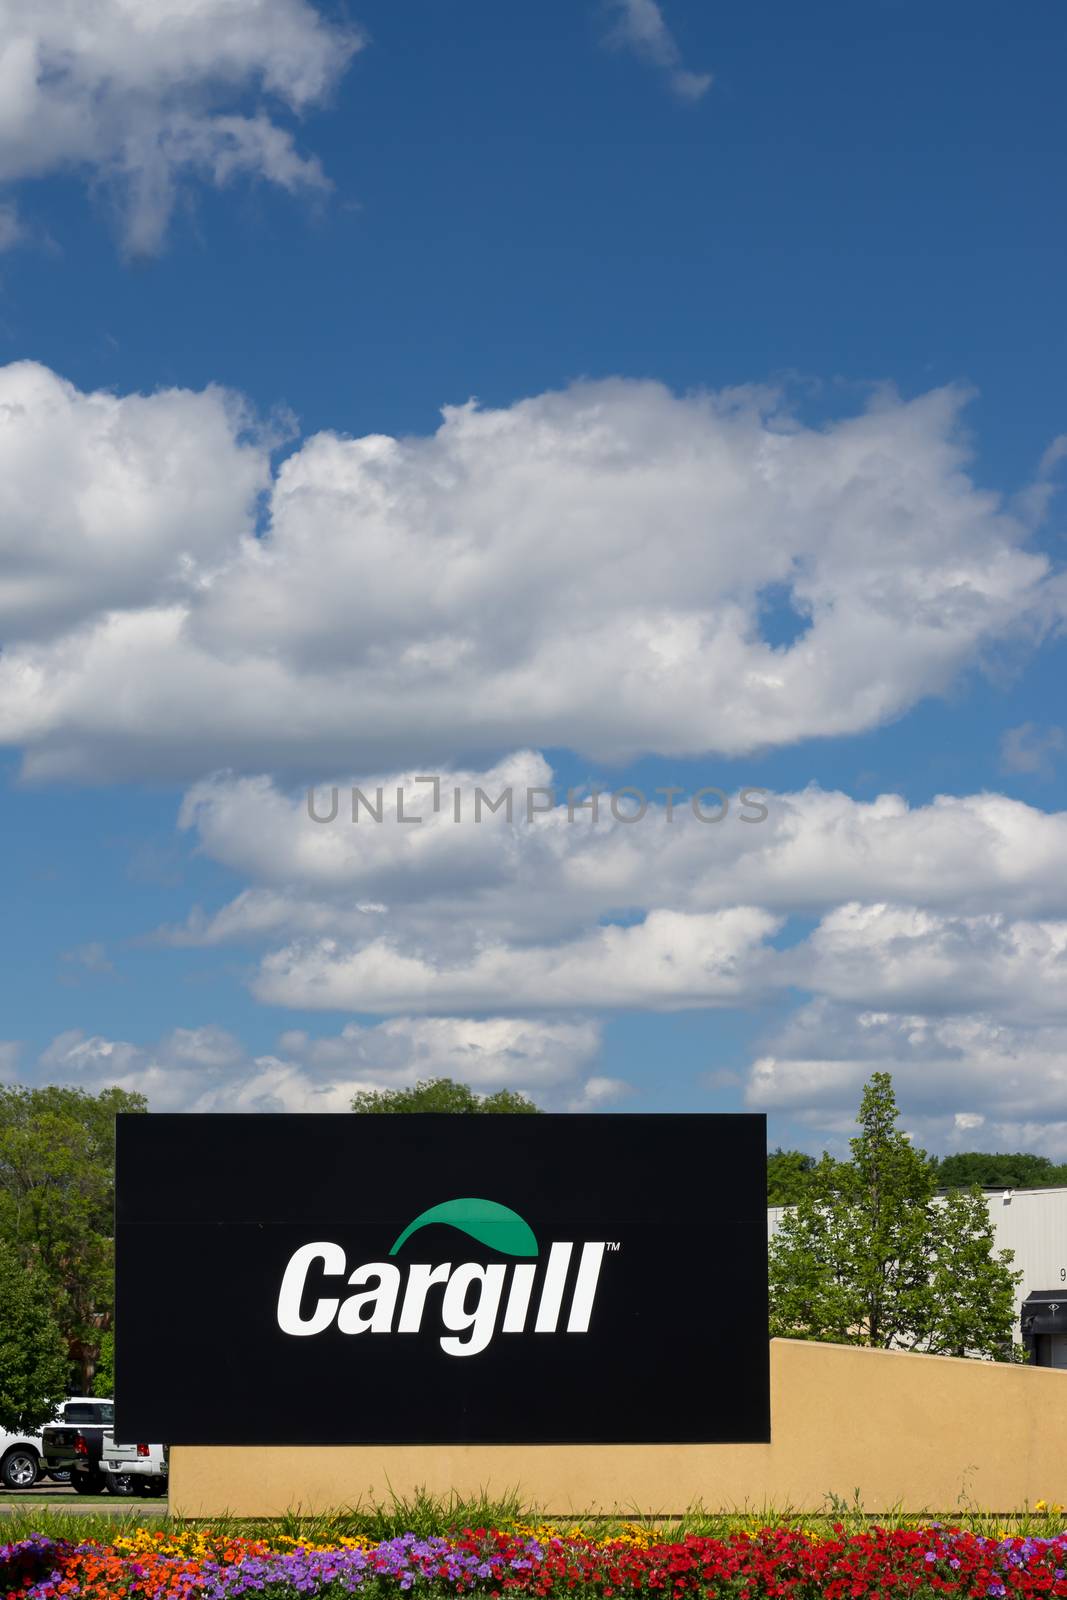 Cargill Corporate Headquarters and Sign by wolterk